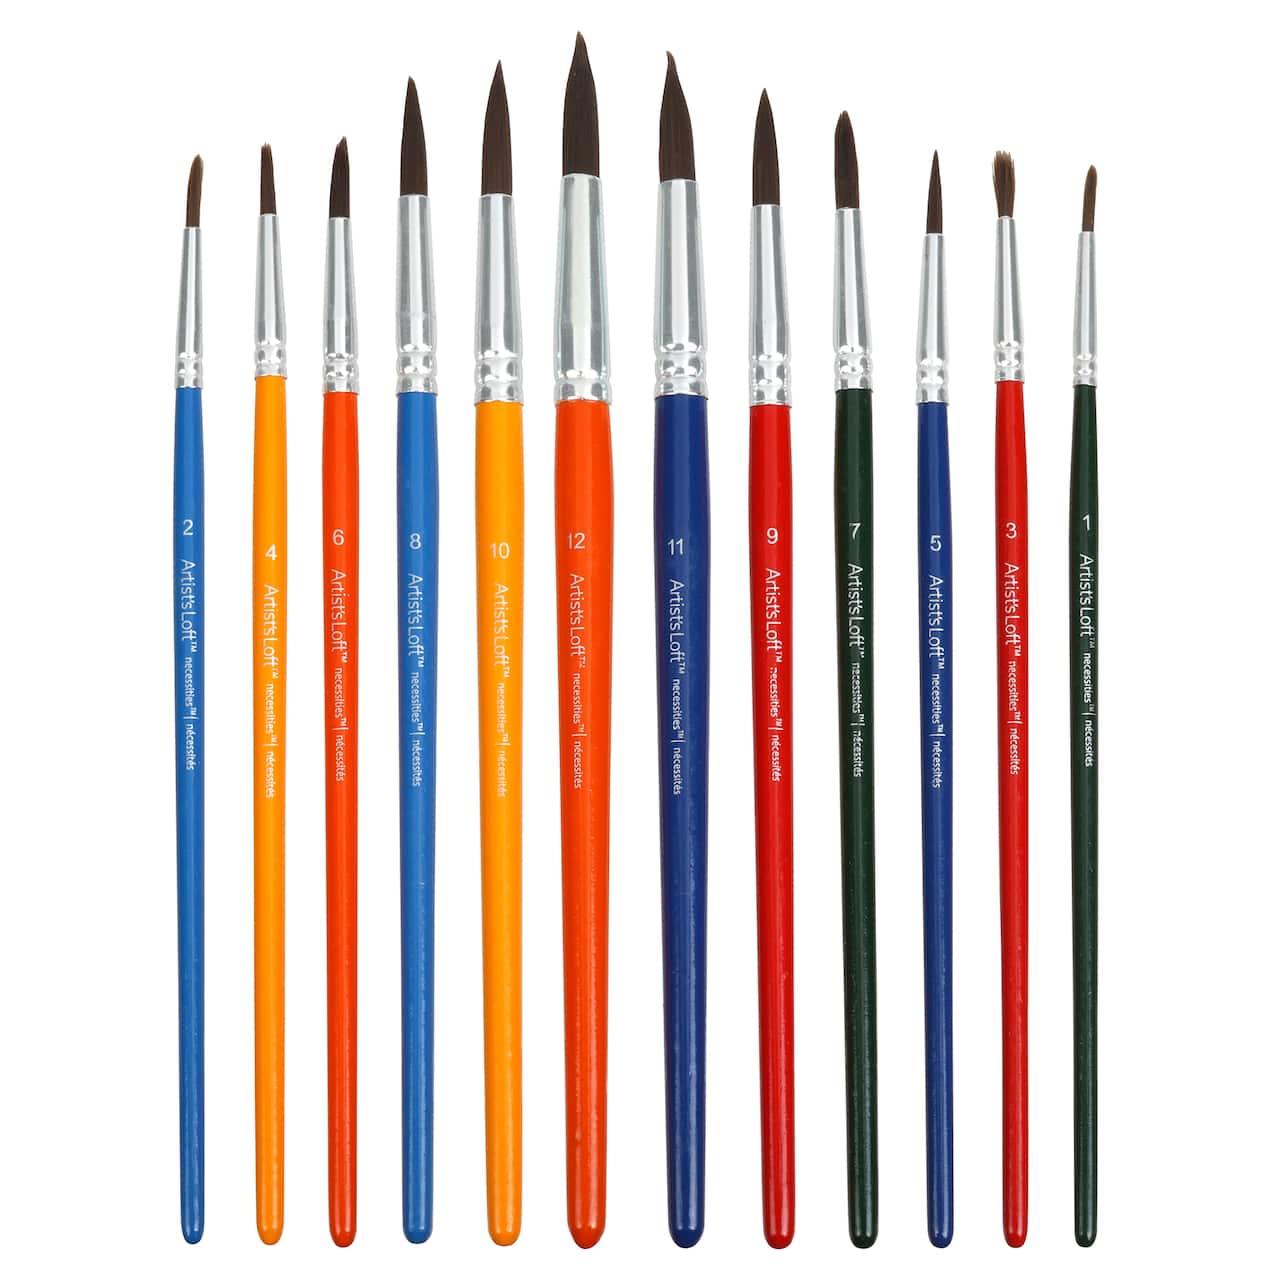 Necessities™ Synthetic Watercolor Round 12 Piece Brush Set by